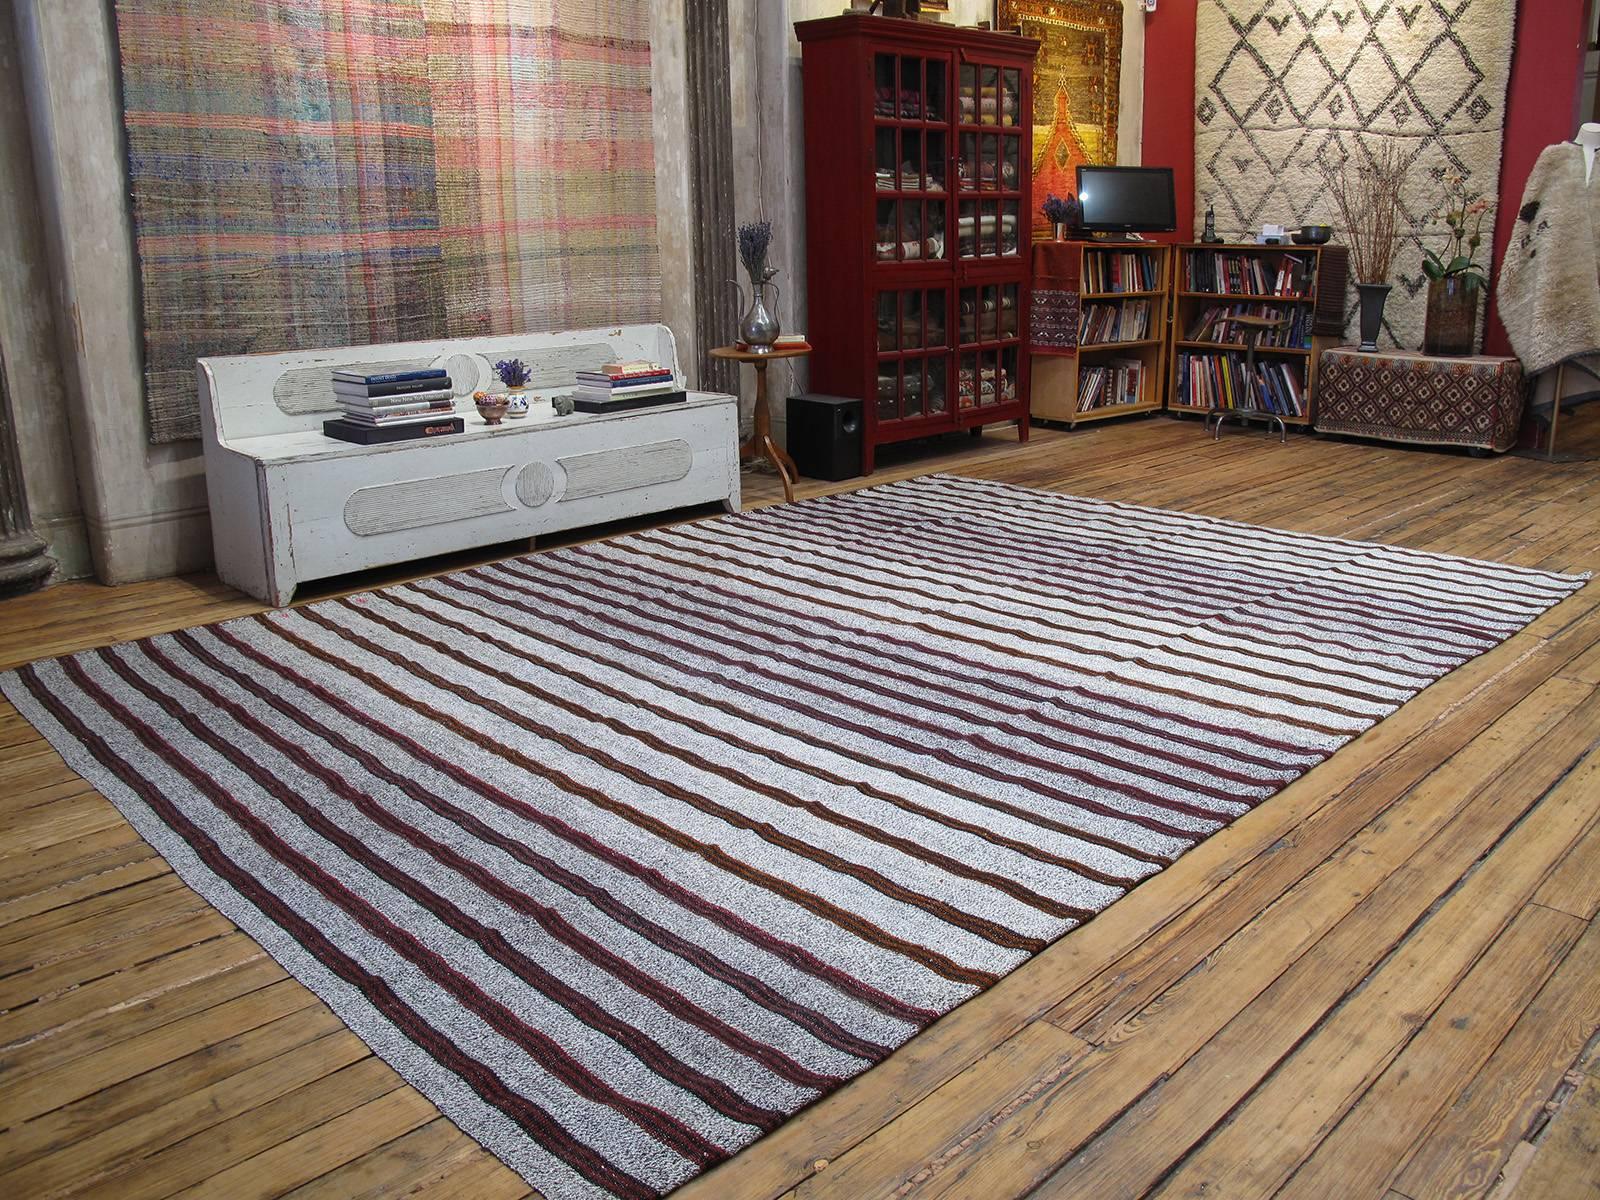 A large old tribal flat-weave from Southeastern Turkey, woven with an ingenious mixture of cotton and goat hair, featuring a pattern of stripes in red and black/brown goat hair. Great modern/Minimalist appeal. The generous proportions are unusual